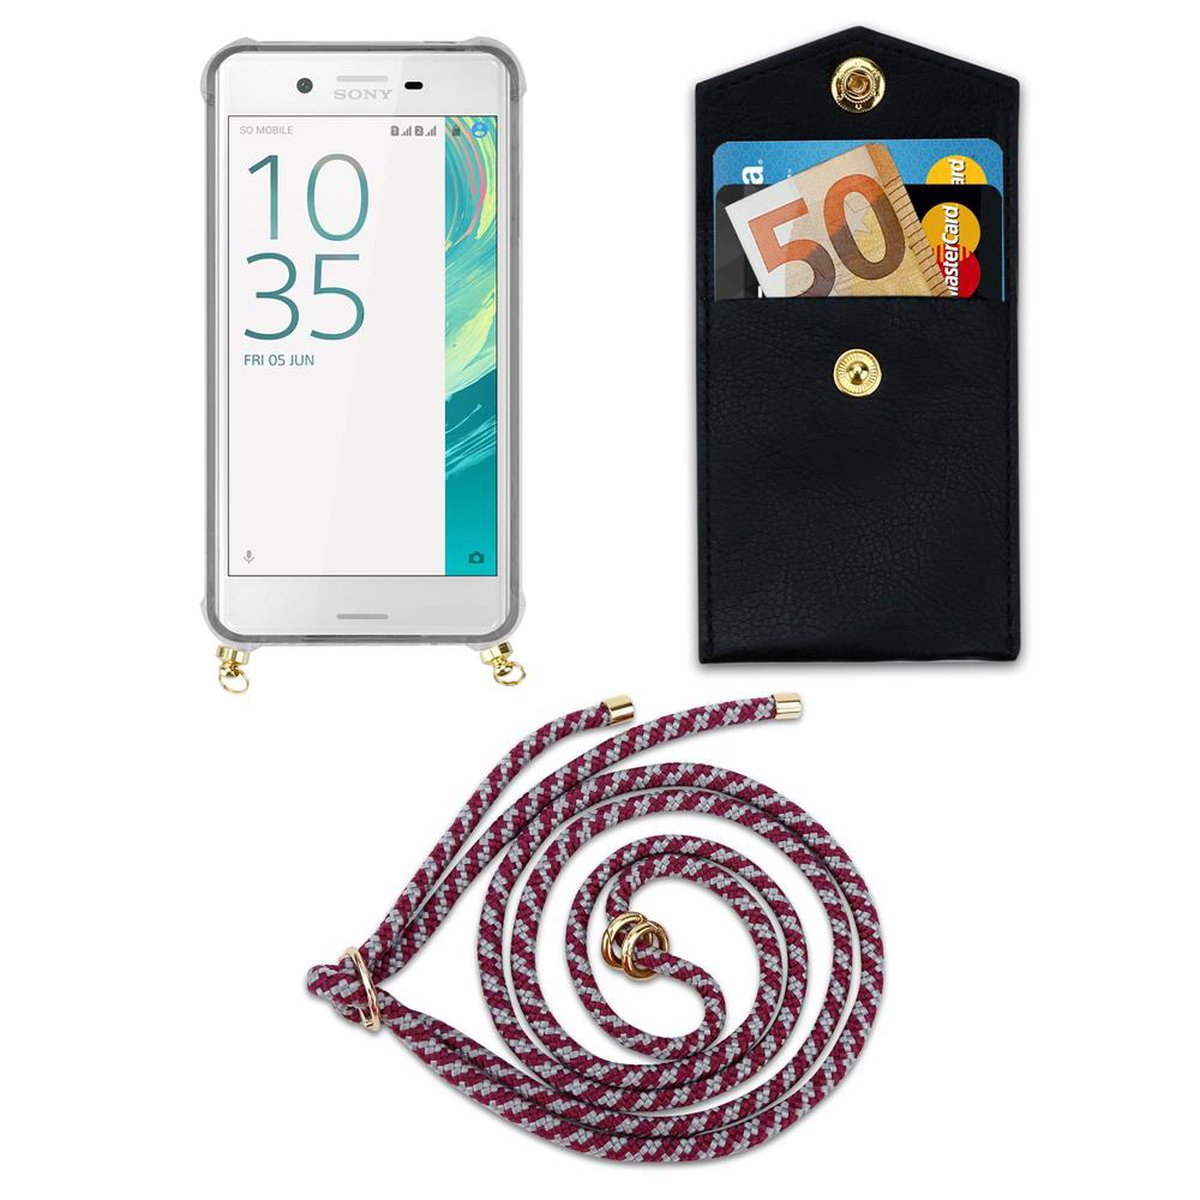 CADORABO Handy Kette mit Sony, X, Hülle, Xperia ROT Kordel und abnehmbarer Gold Ringen, Backcover, Band WEIß